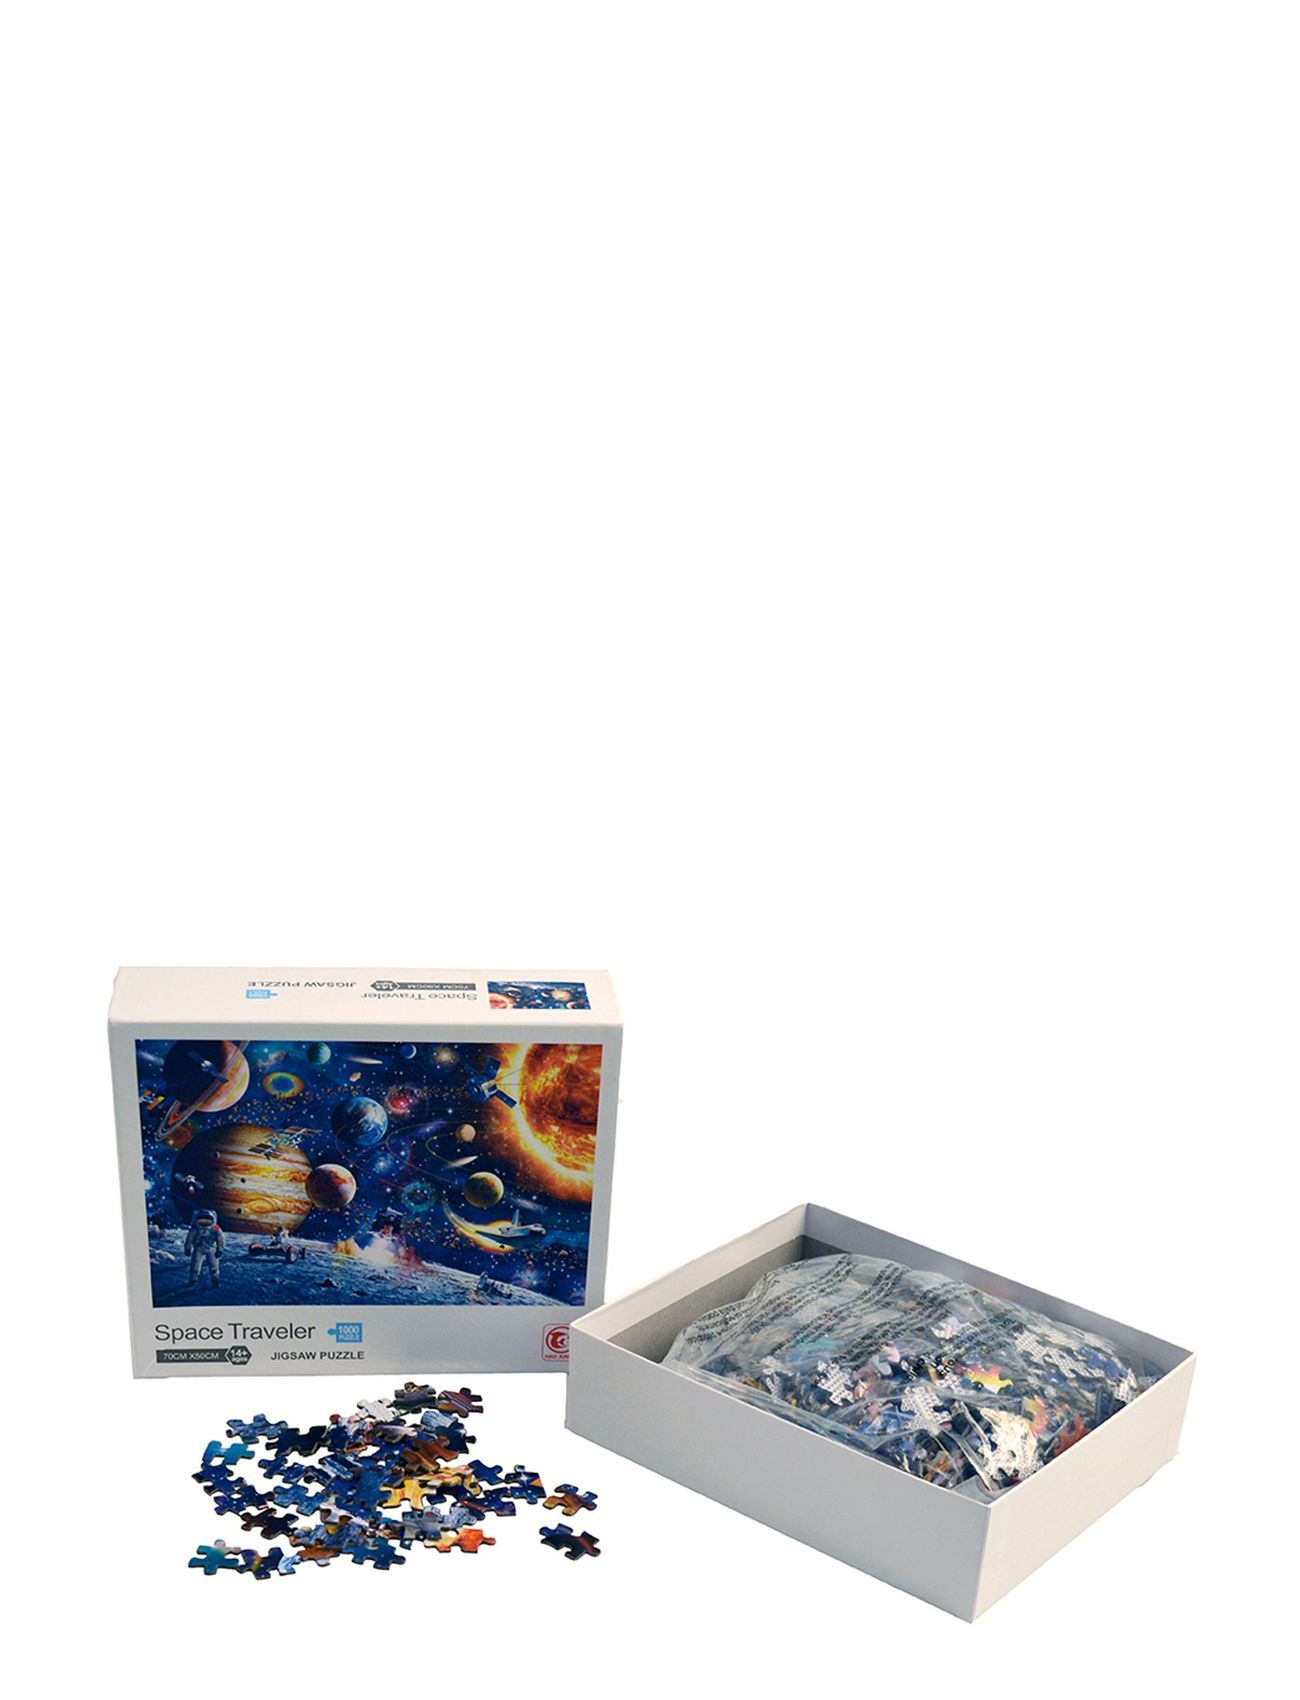 Magni Toys Puzzle "Space Travel", 1000 Pcs. Toys Puzzles And Games Puzzles Multi/mønstret Magni Toys